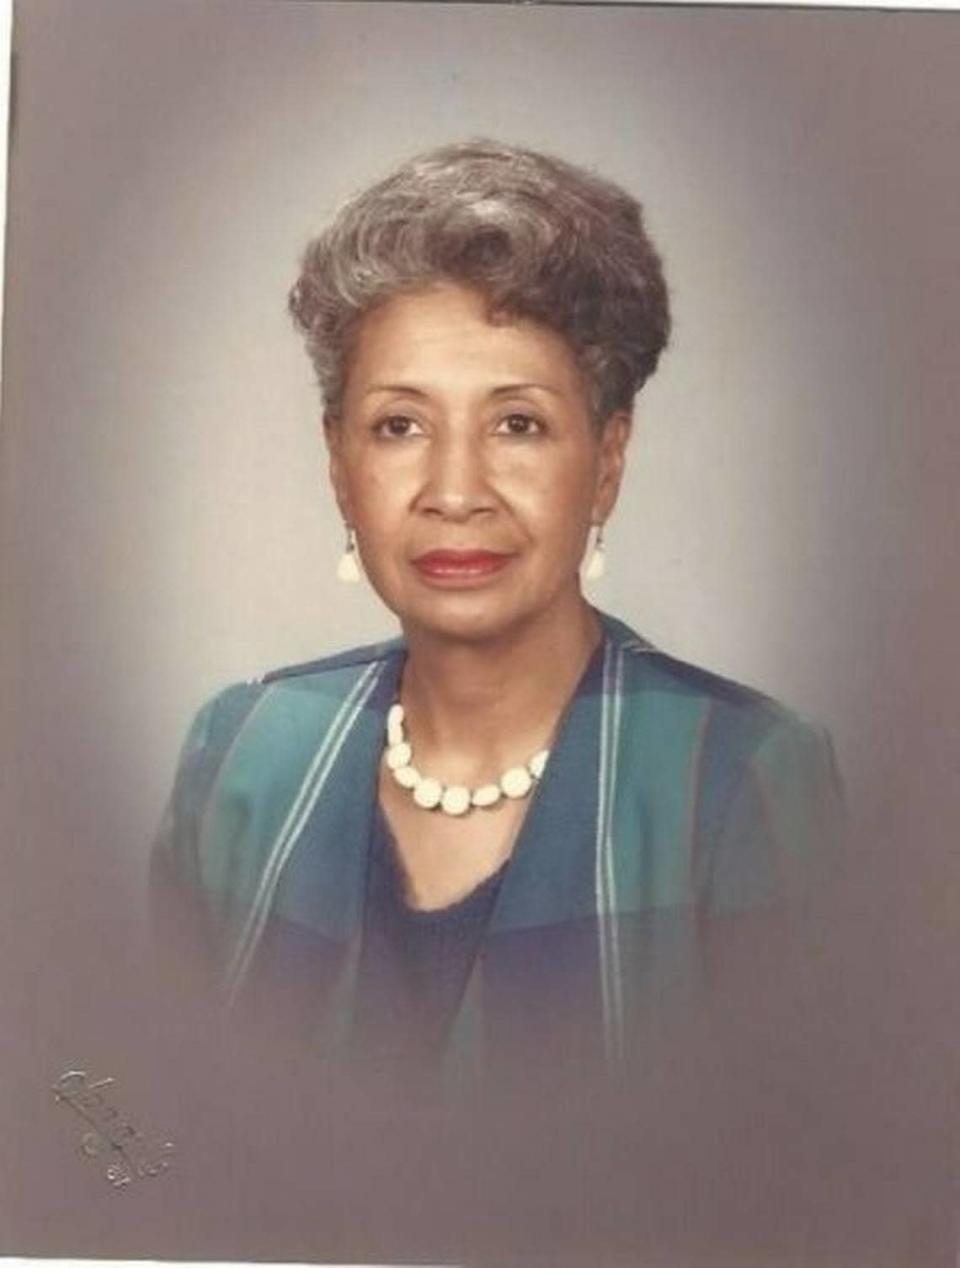 Bettylu Donaldson, of Kansas City, died Jan. 5 at age 95. She served as assistant director of juvenile court services for Jackson County.